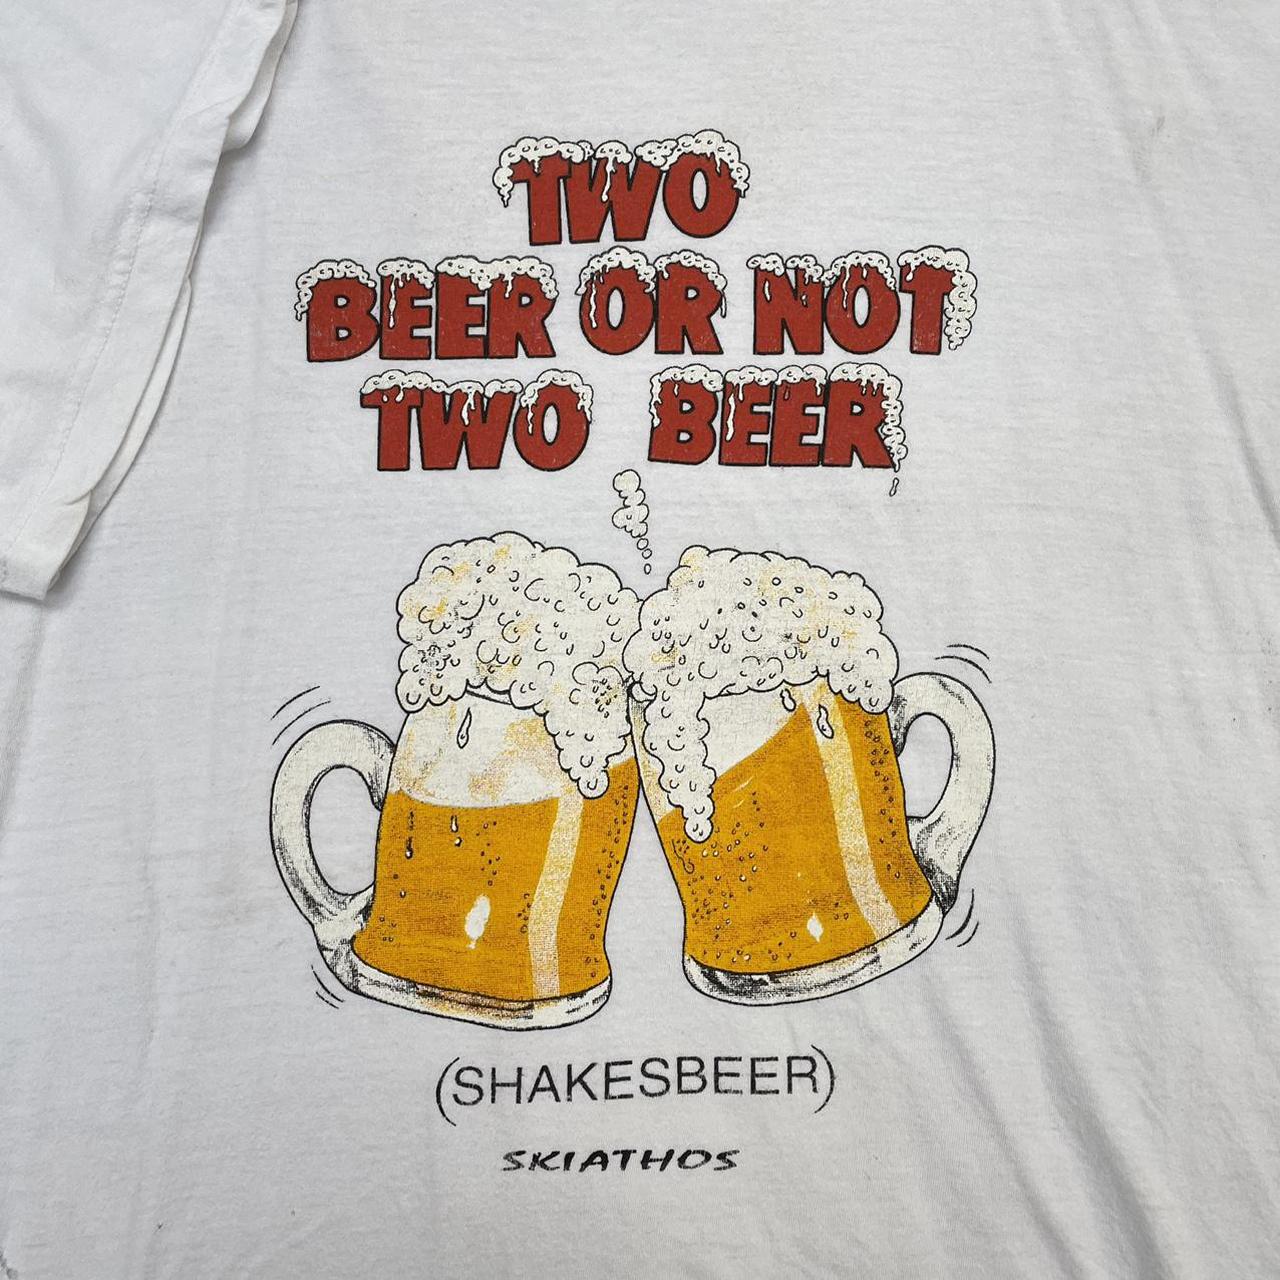 Vintage 1980s 1990s White Two beer or not Two beer... - Depop